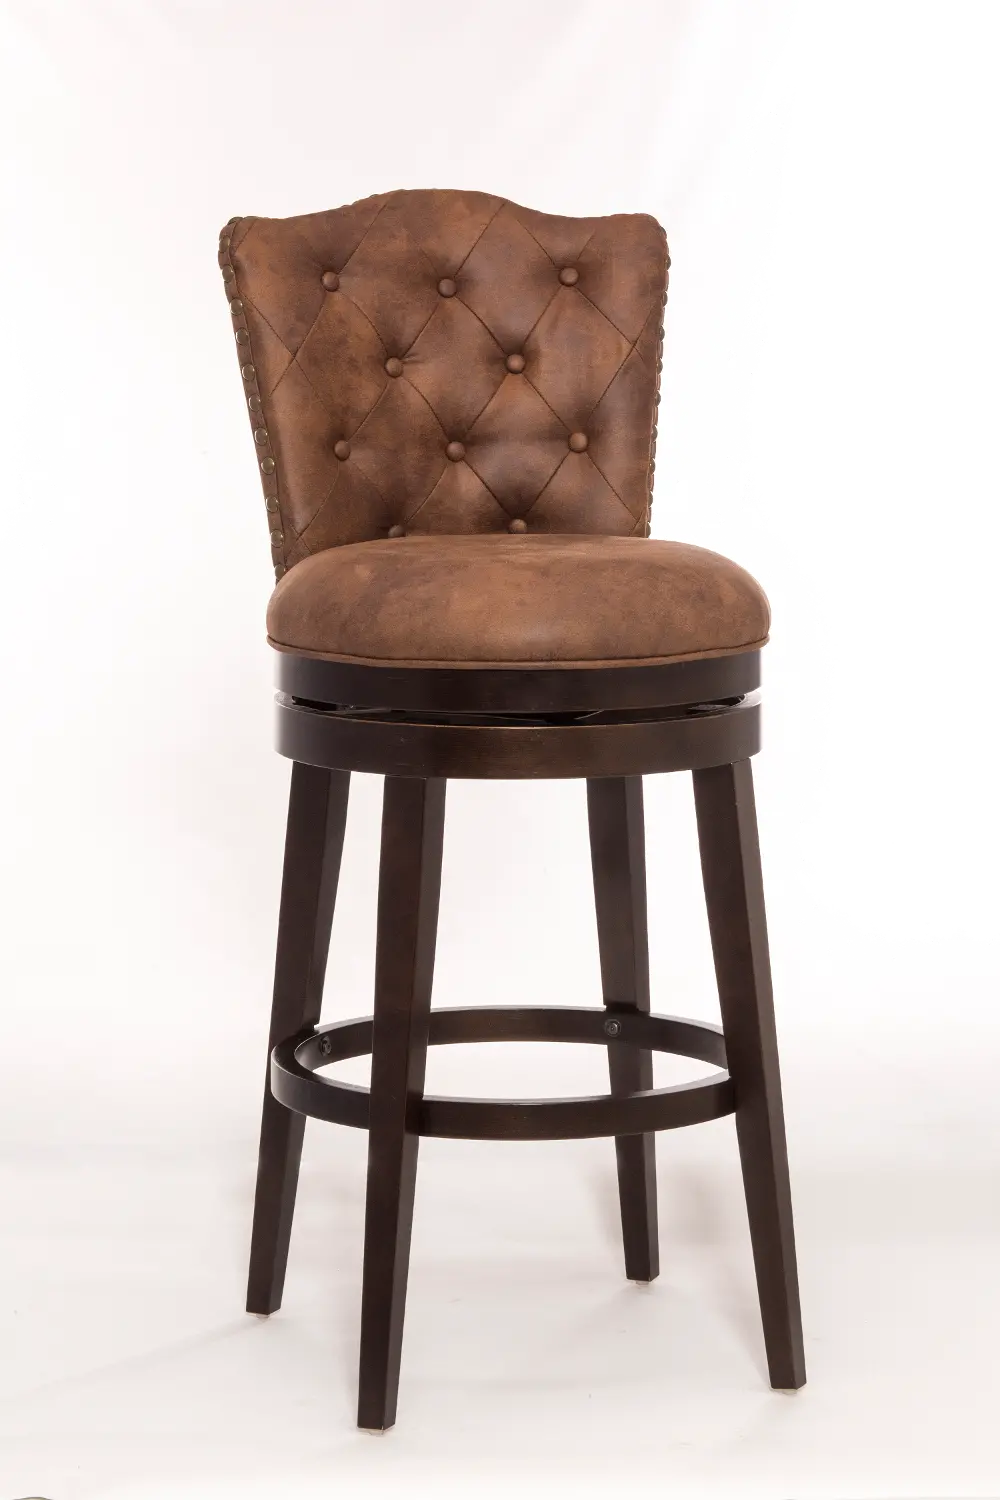 Traditional Chocolate Brown Swivel Counter Height Stool - Edenwood-1